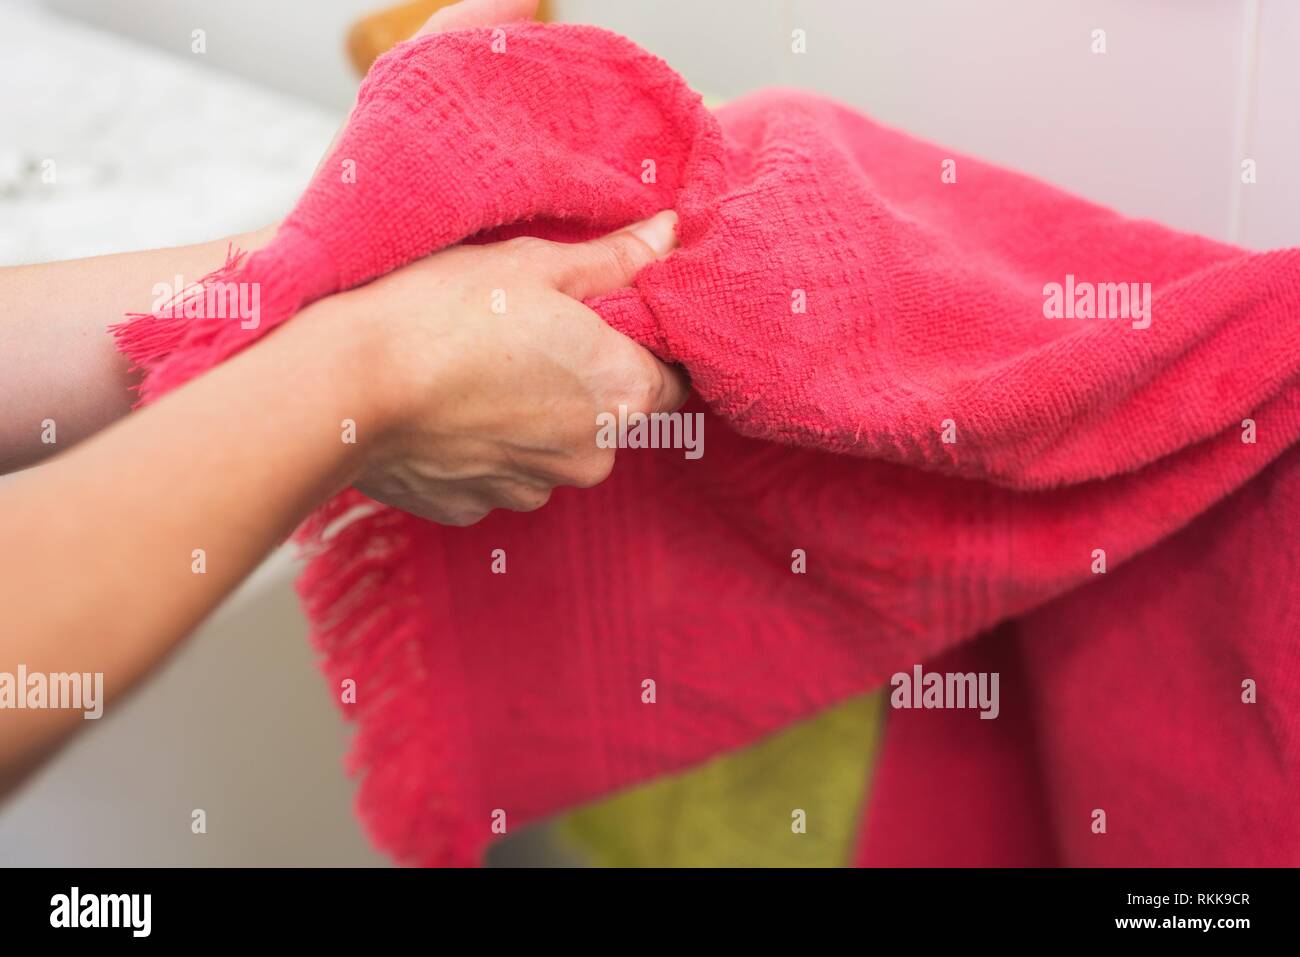 Woman drying hands with towel. Stock Photo